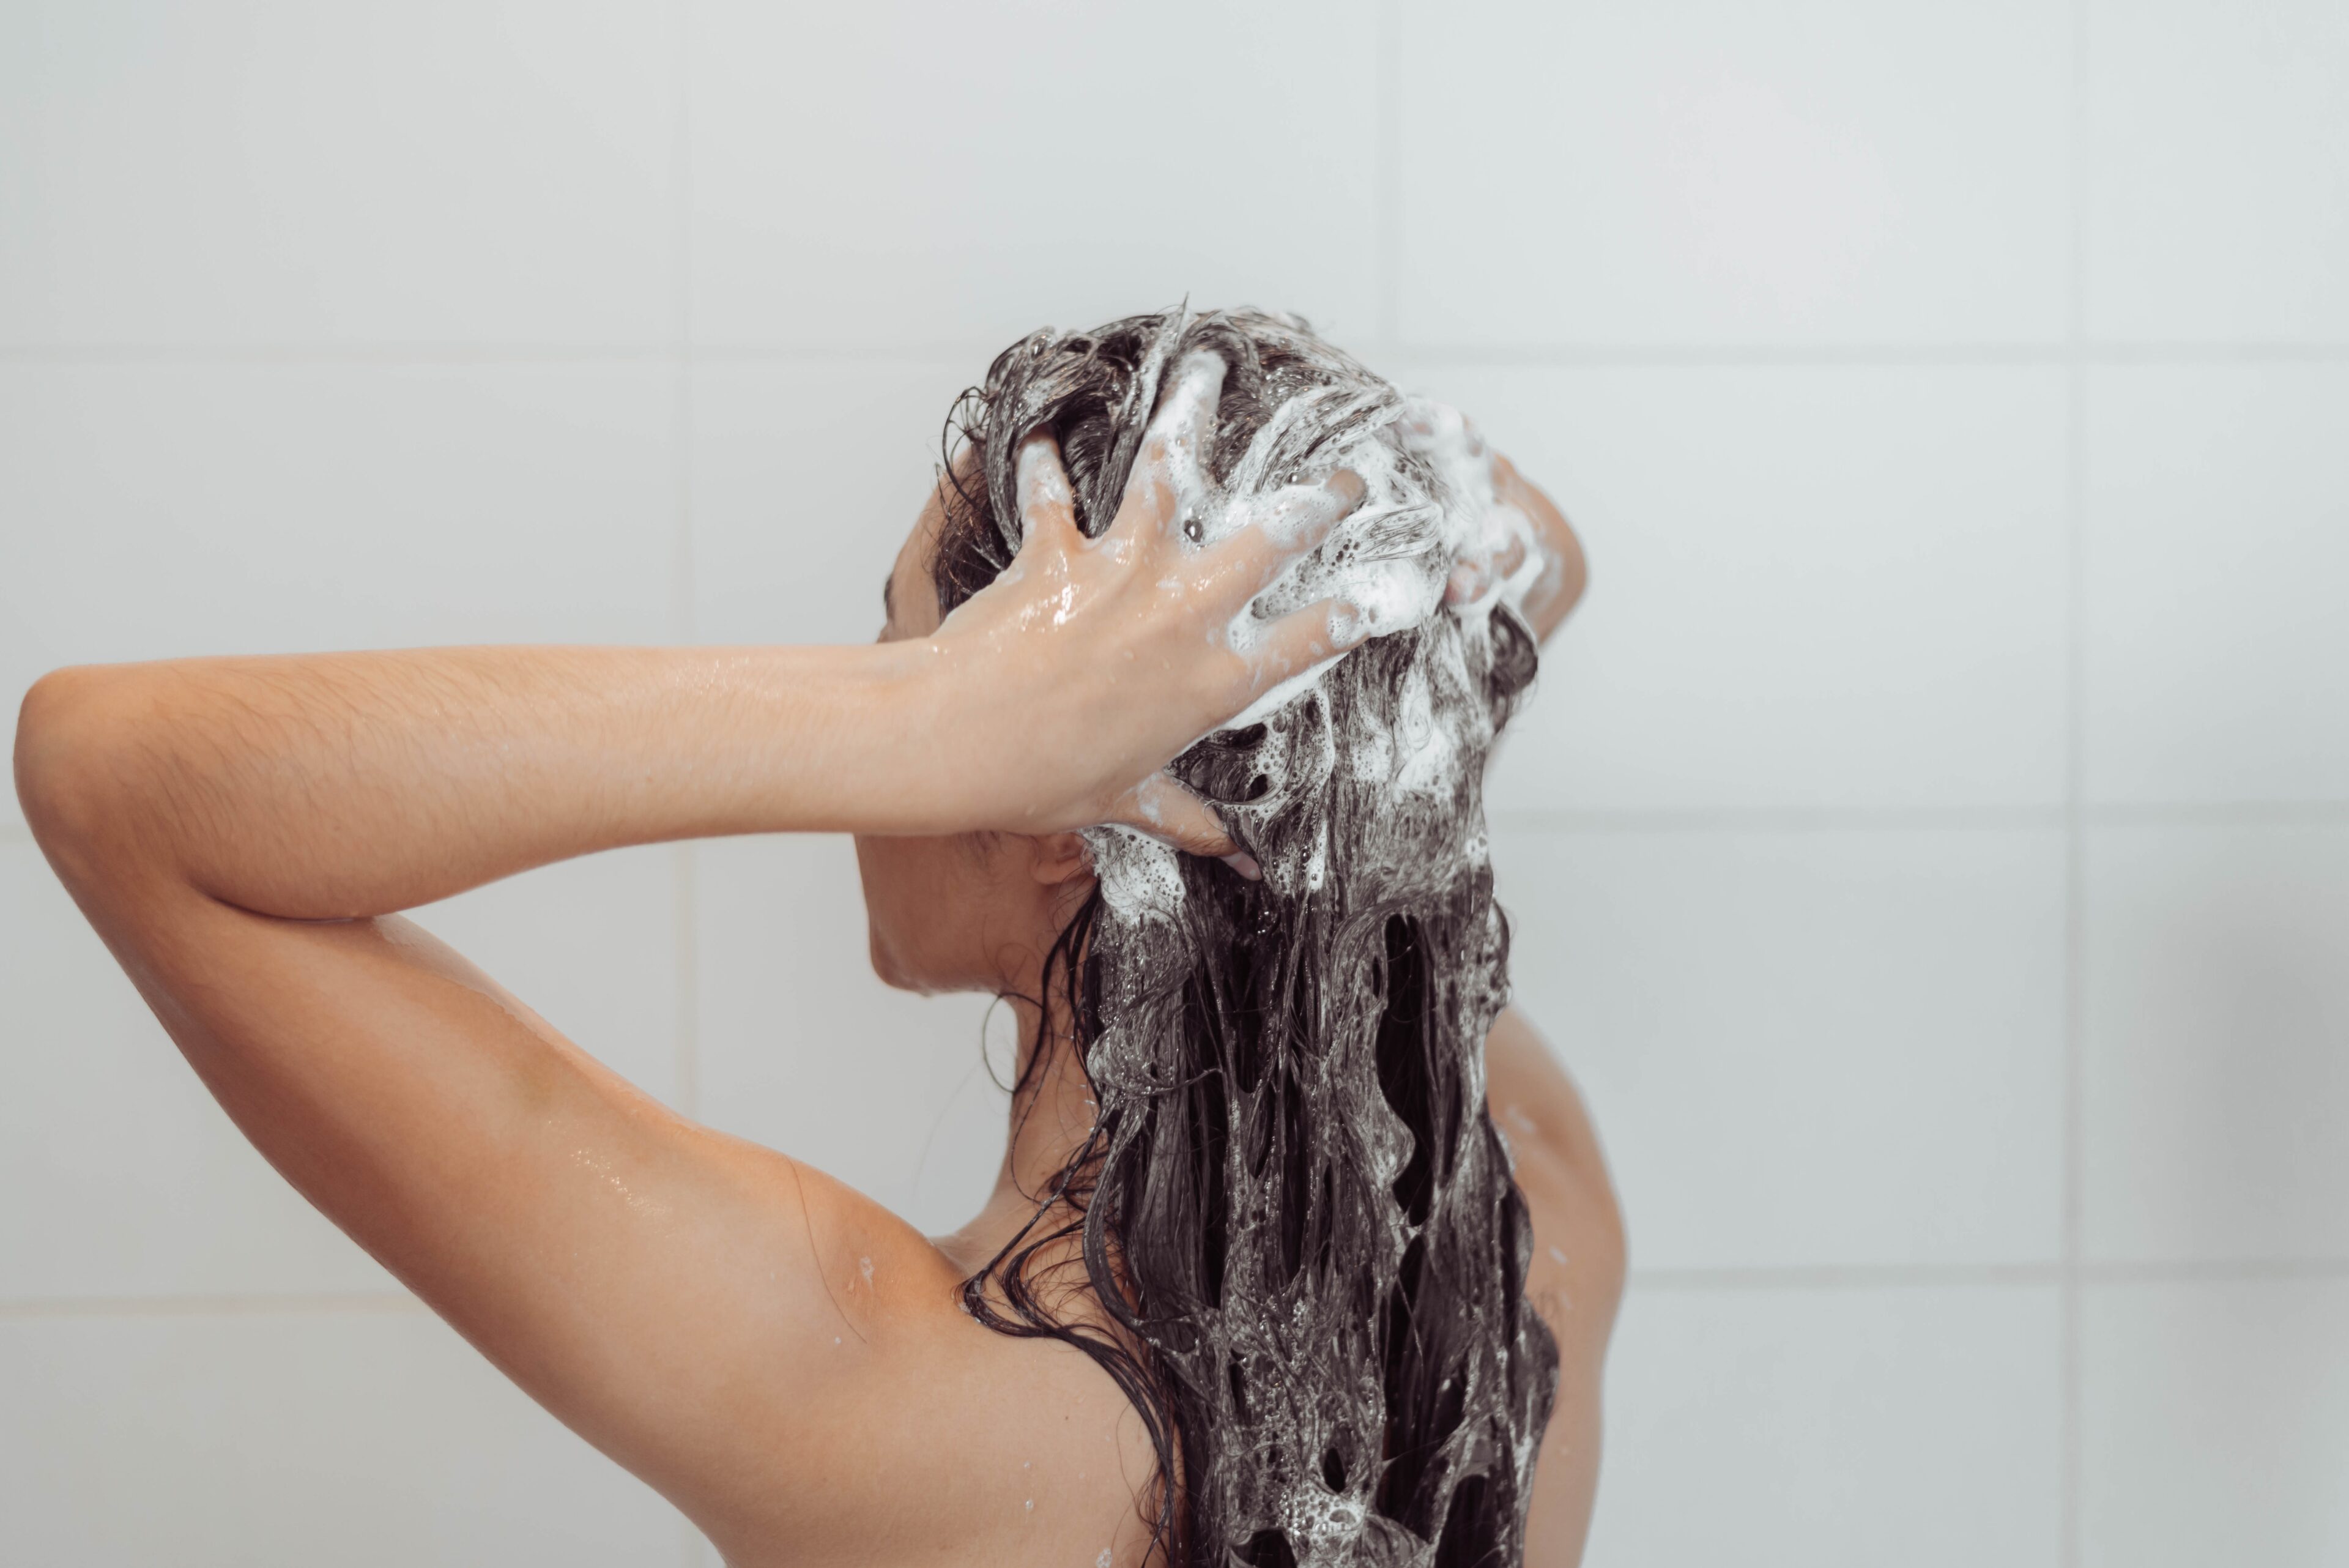 Rinse the hair with a shampoo